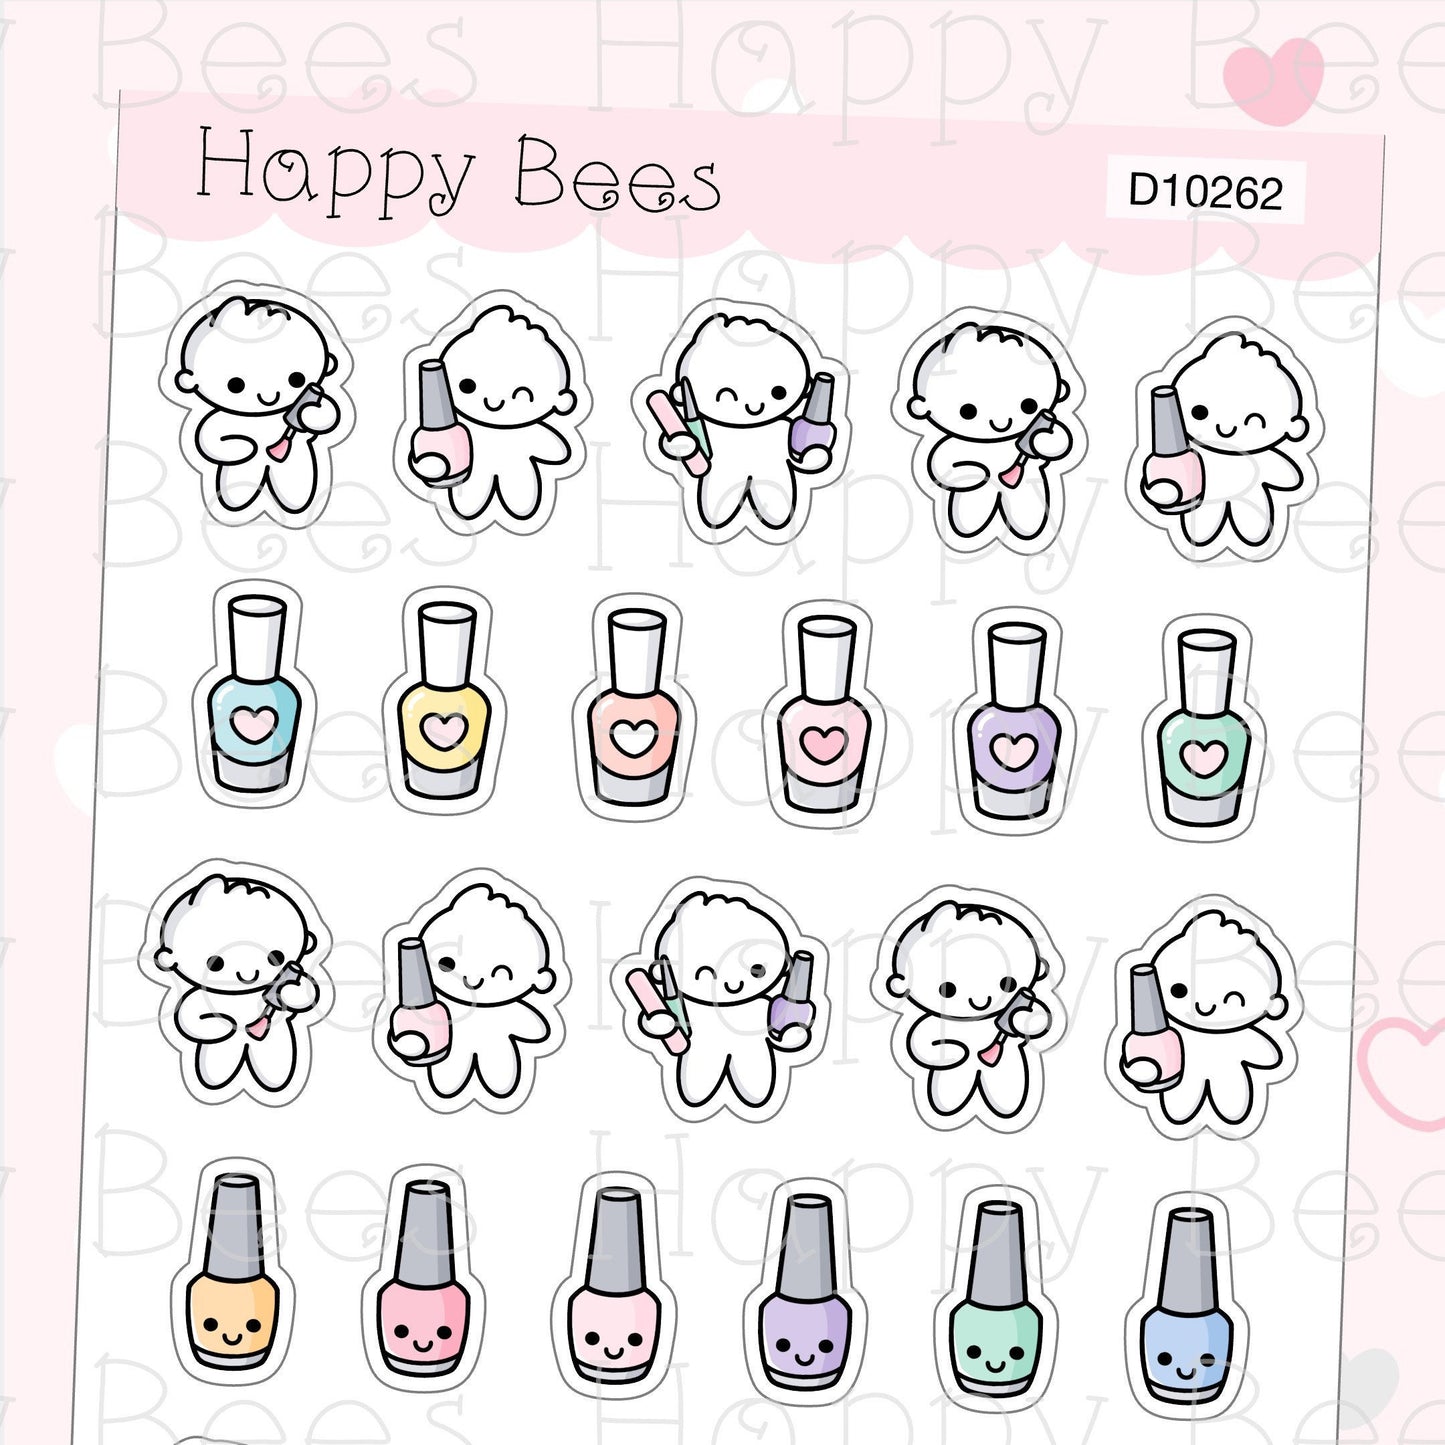 Nail Polish Doodles - Cute Beauty Planner Stickers D10262